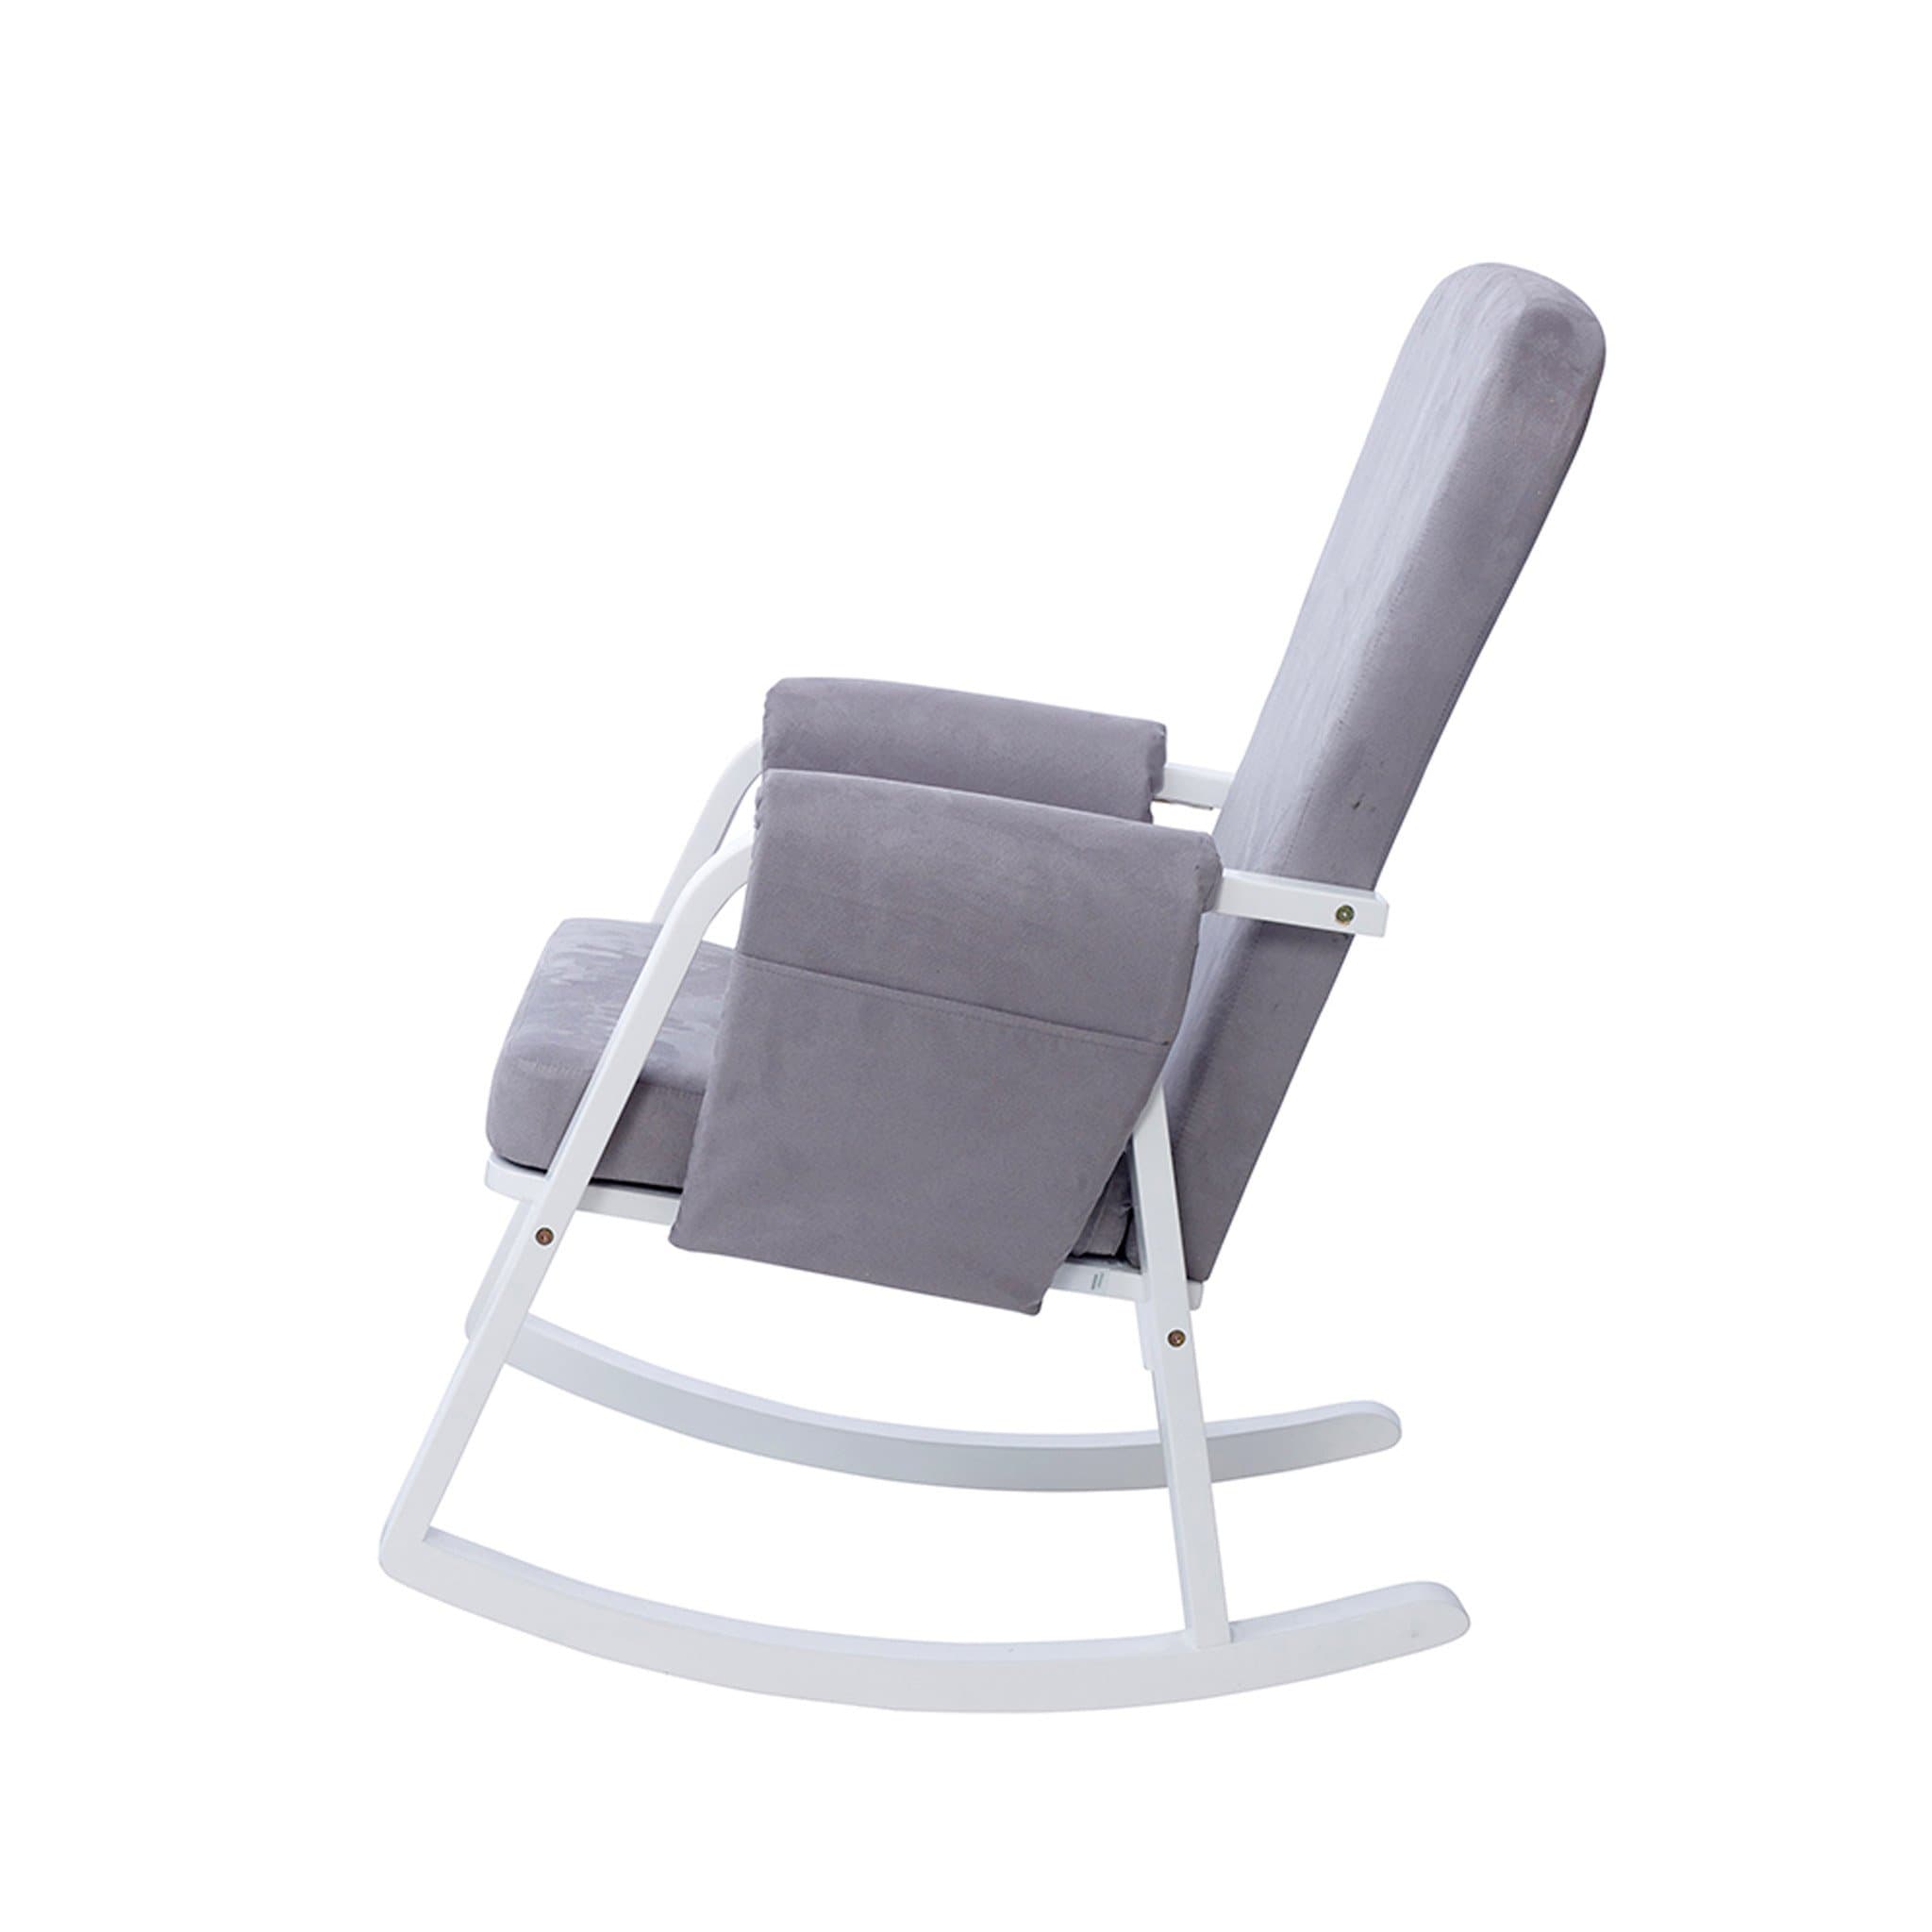 Ickle Bubba Dursley Rocking Chair and Stool Pearl Grey Nursing Chairs 48-005-000-840 5060738074327